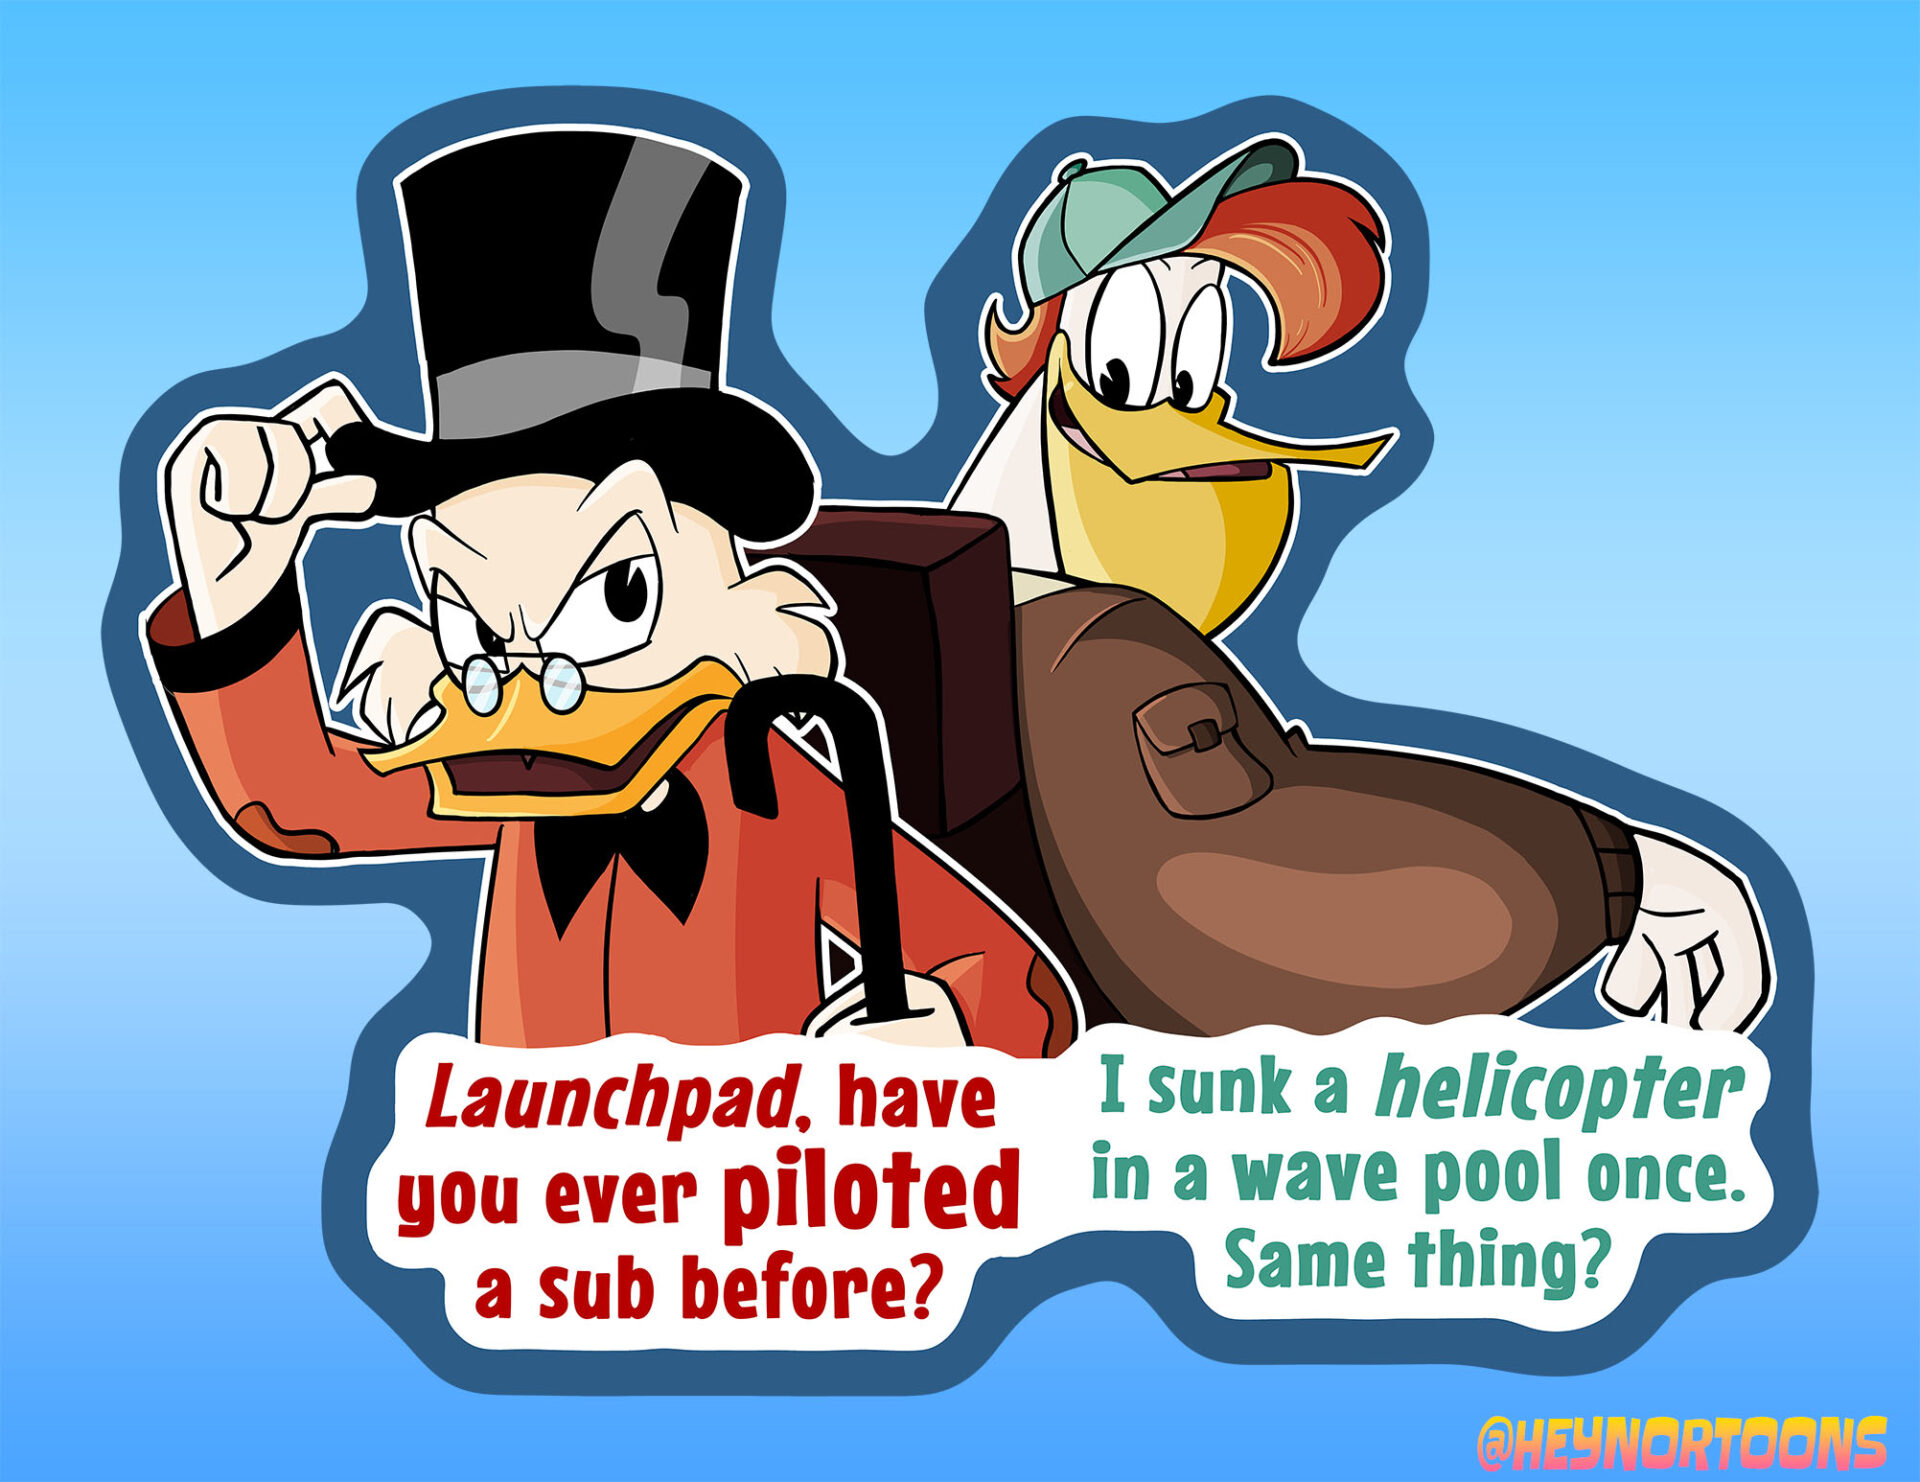 Scrooge McDuck and Launchpad McQuack: Have you ever piloted a sub before?